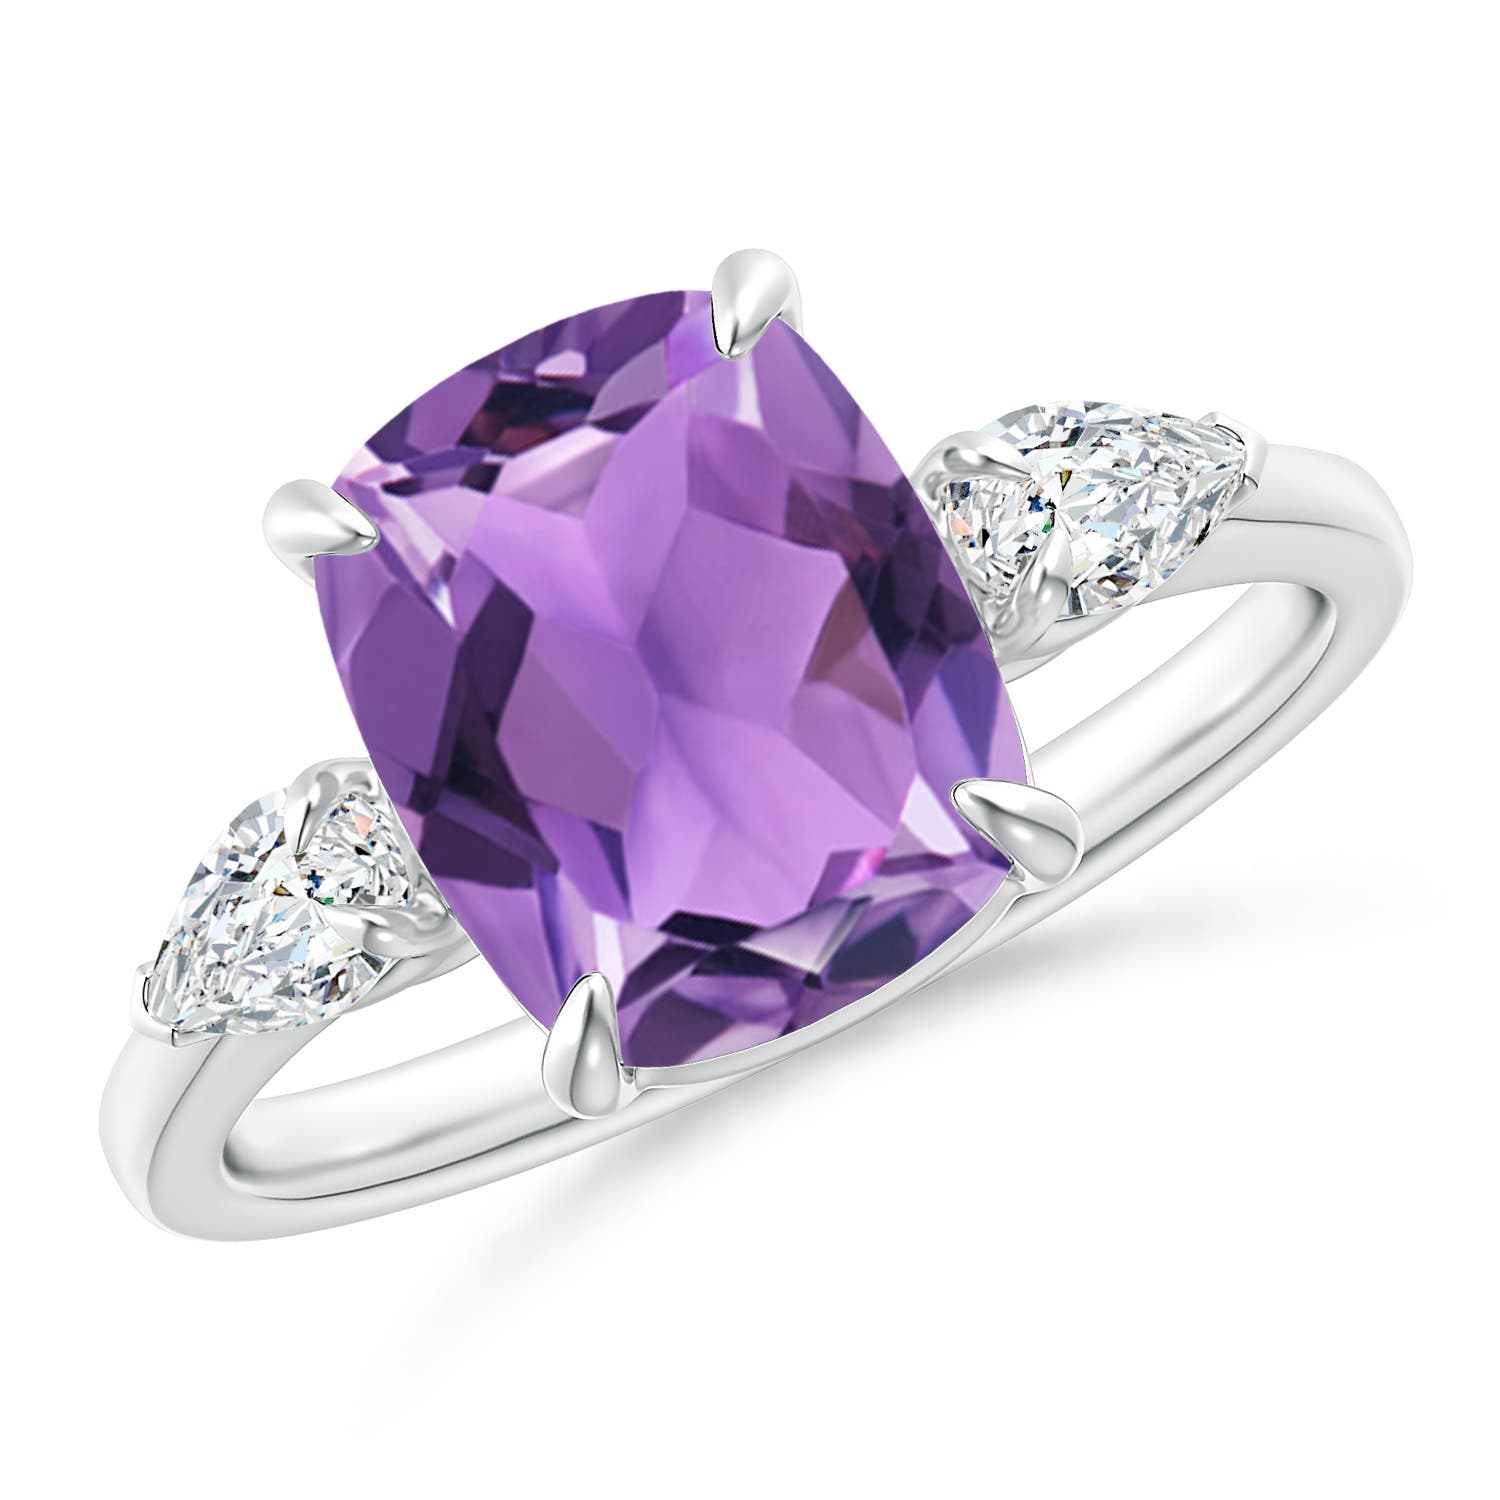 AA - Amethyst / 3.1 CT / 14 KT White Gold